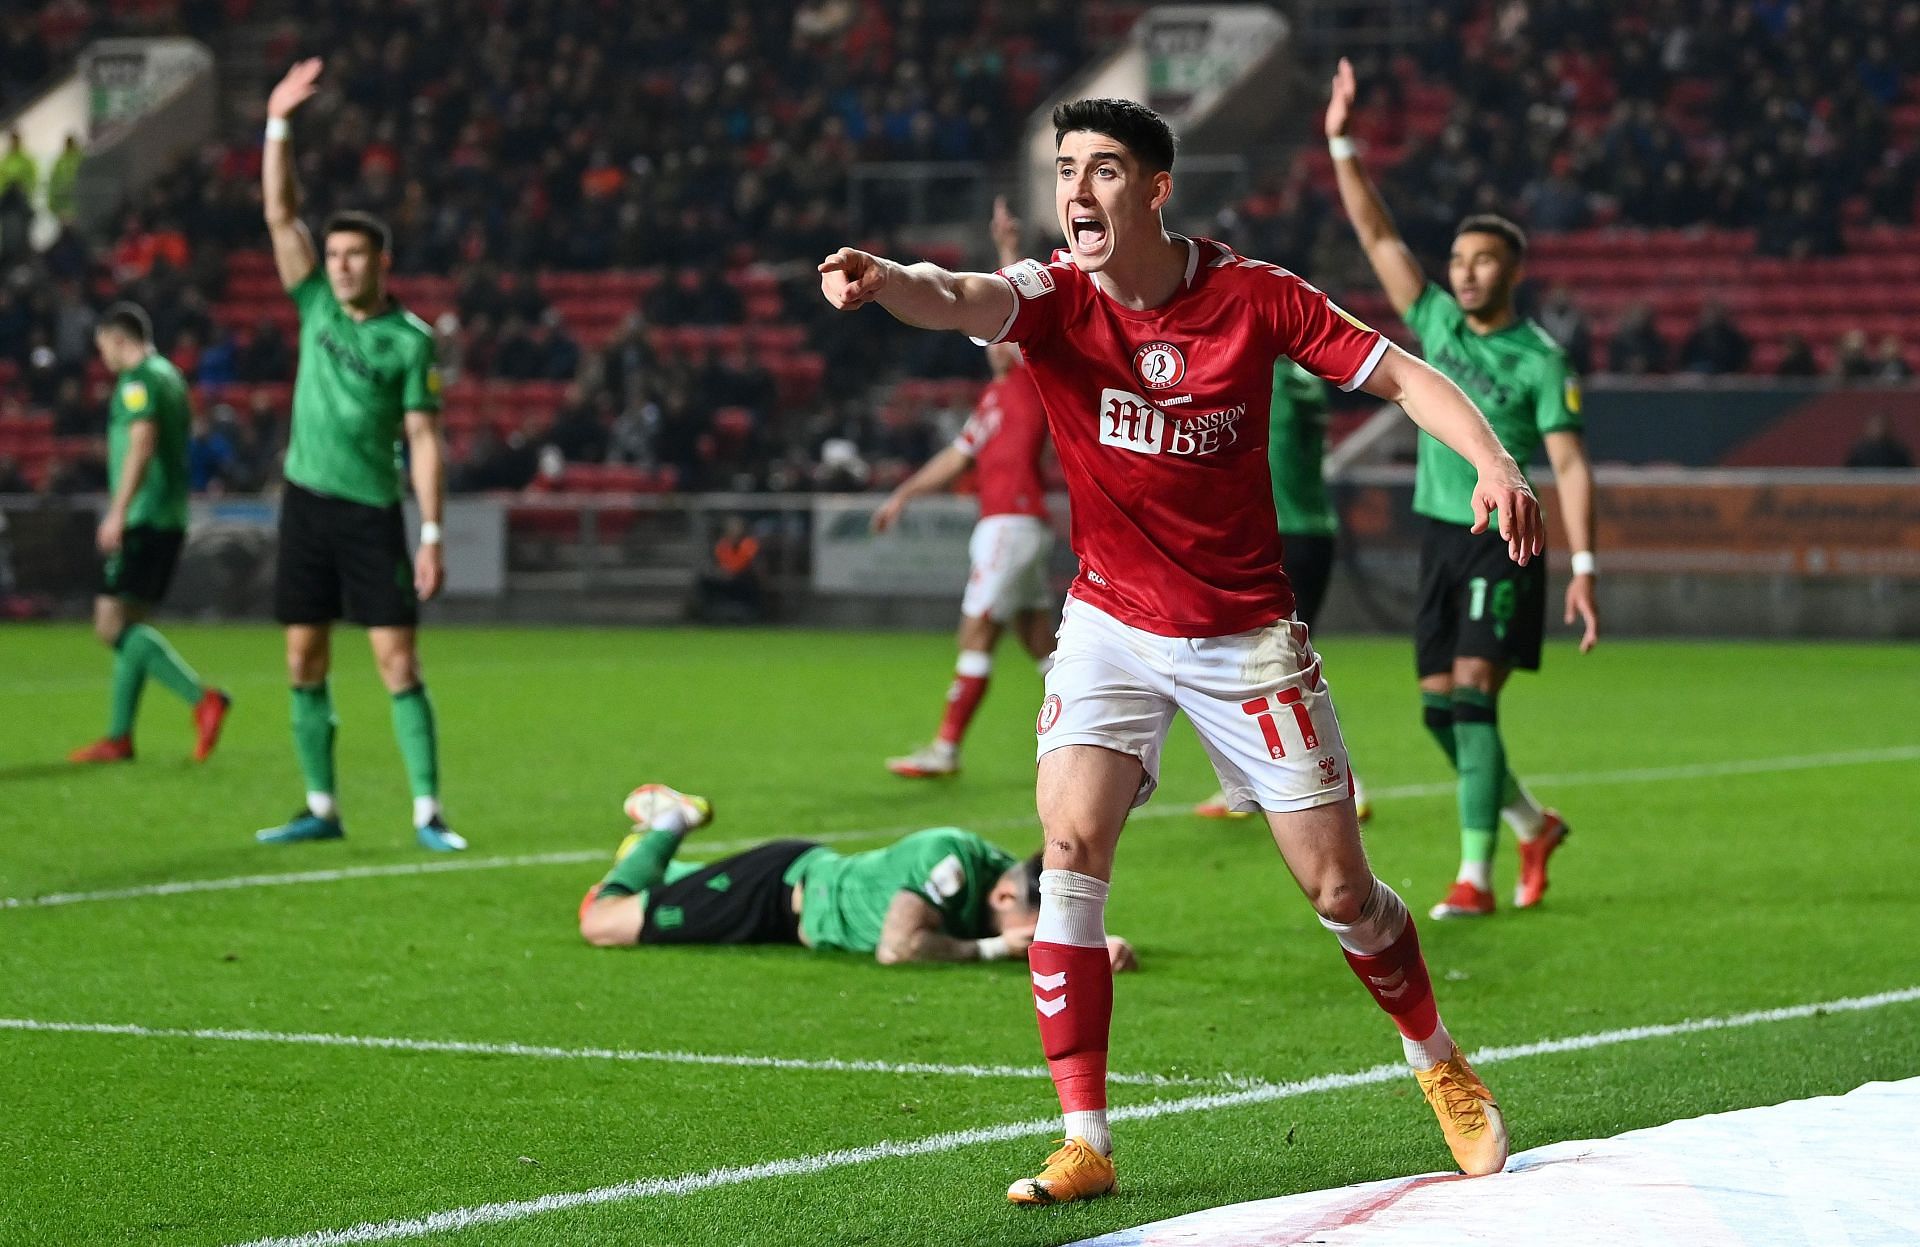 Bristol City will face Luton Town on Saturday - Sky Bet Championship